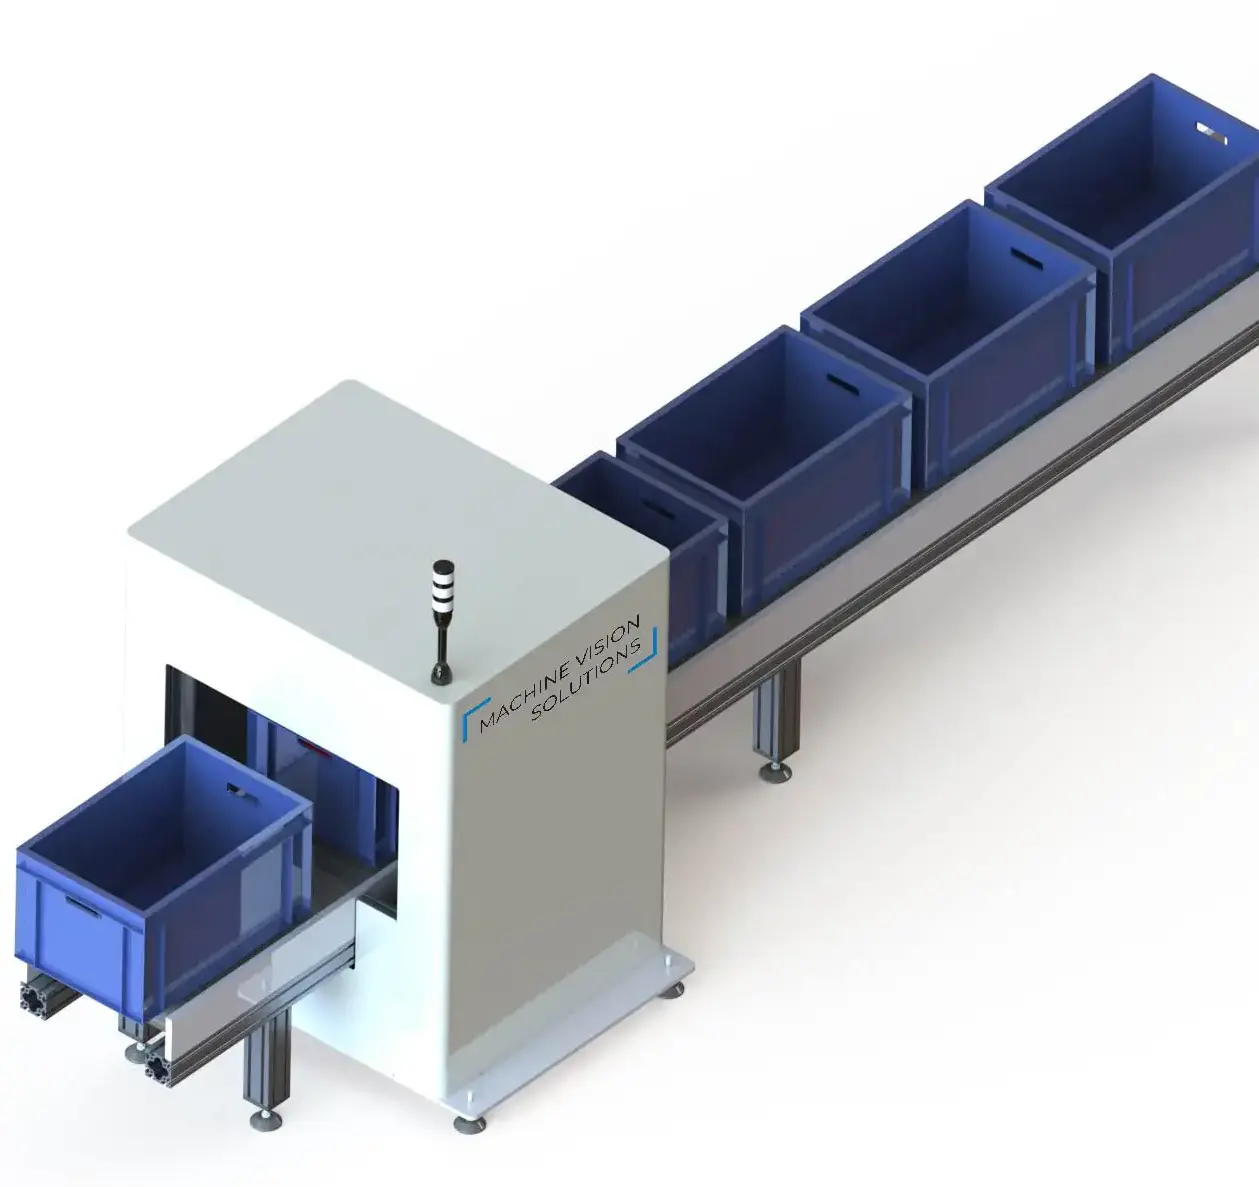 Automated 3D container inspection for checking plastic containers for deformation and damage.